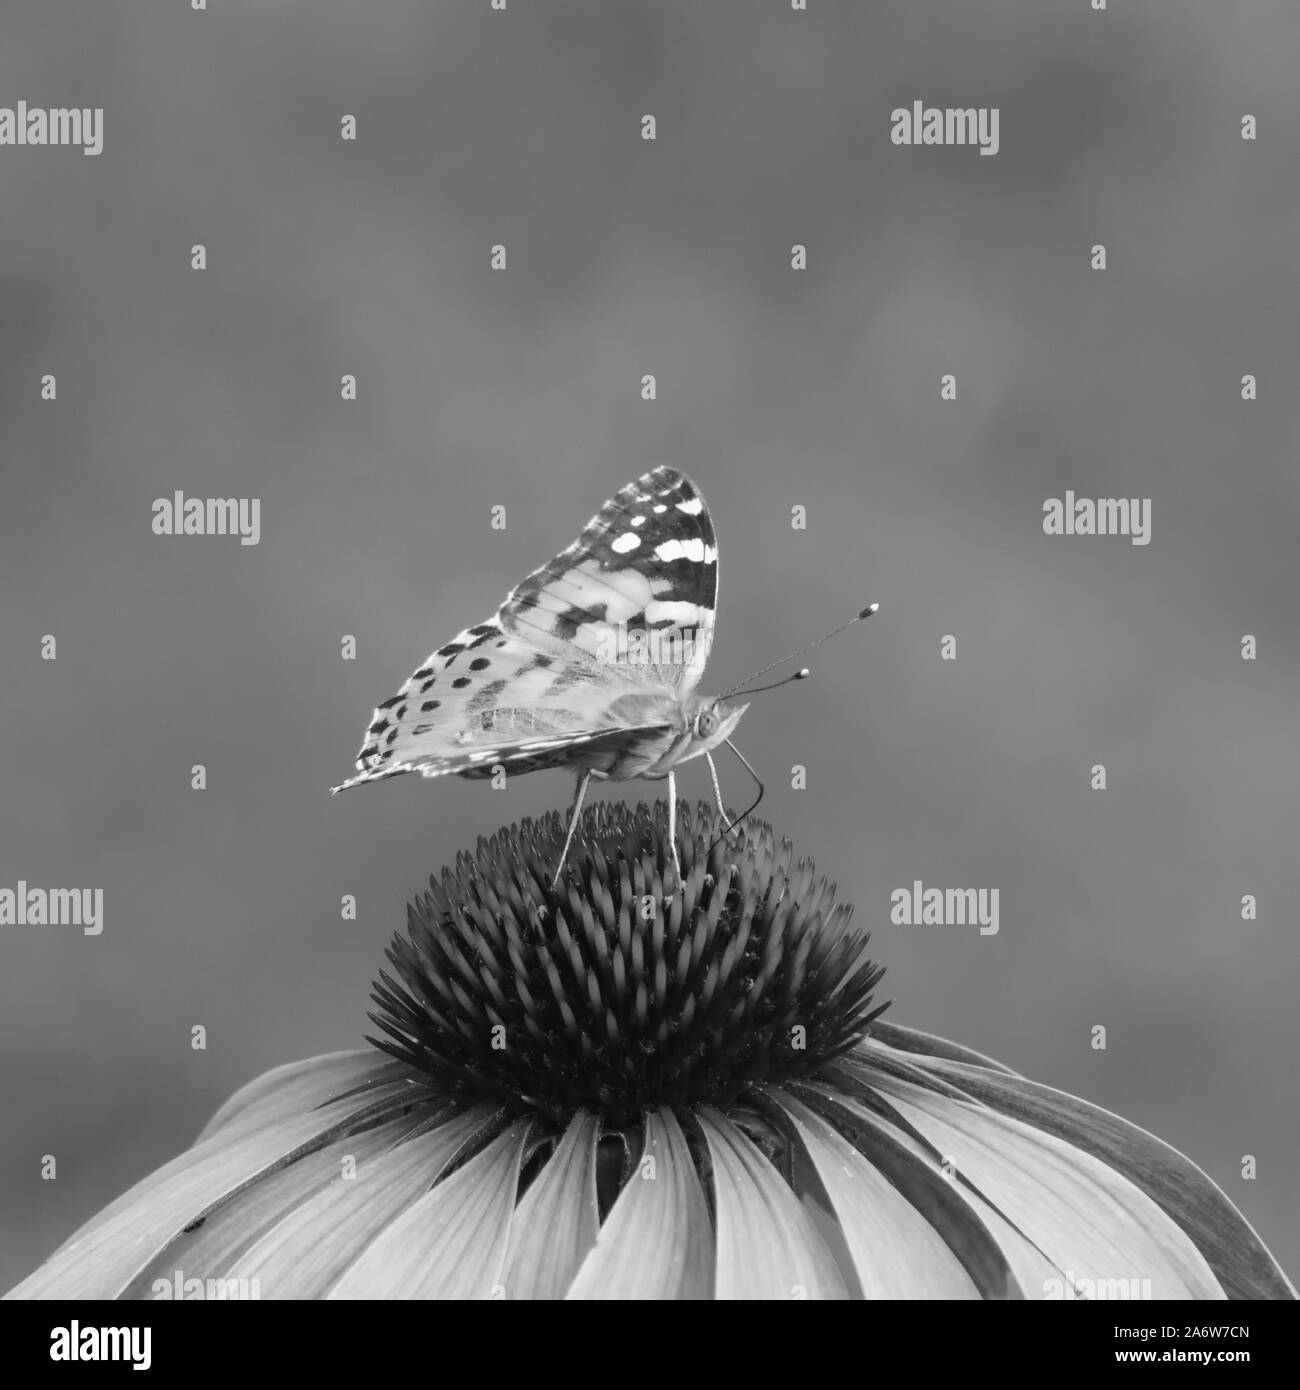 close-up of a painted lady (Vanessa cardui) on the blossom of a coneflower, monochrome image Stock Photo